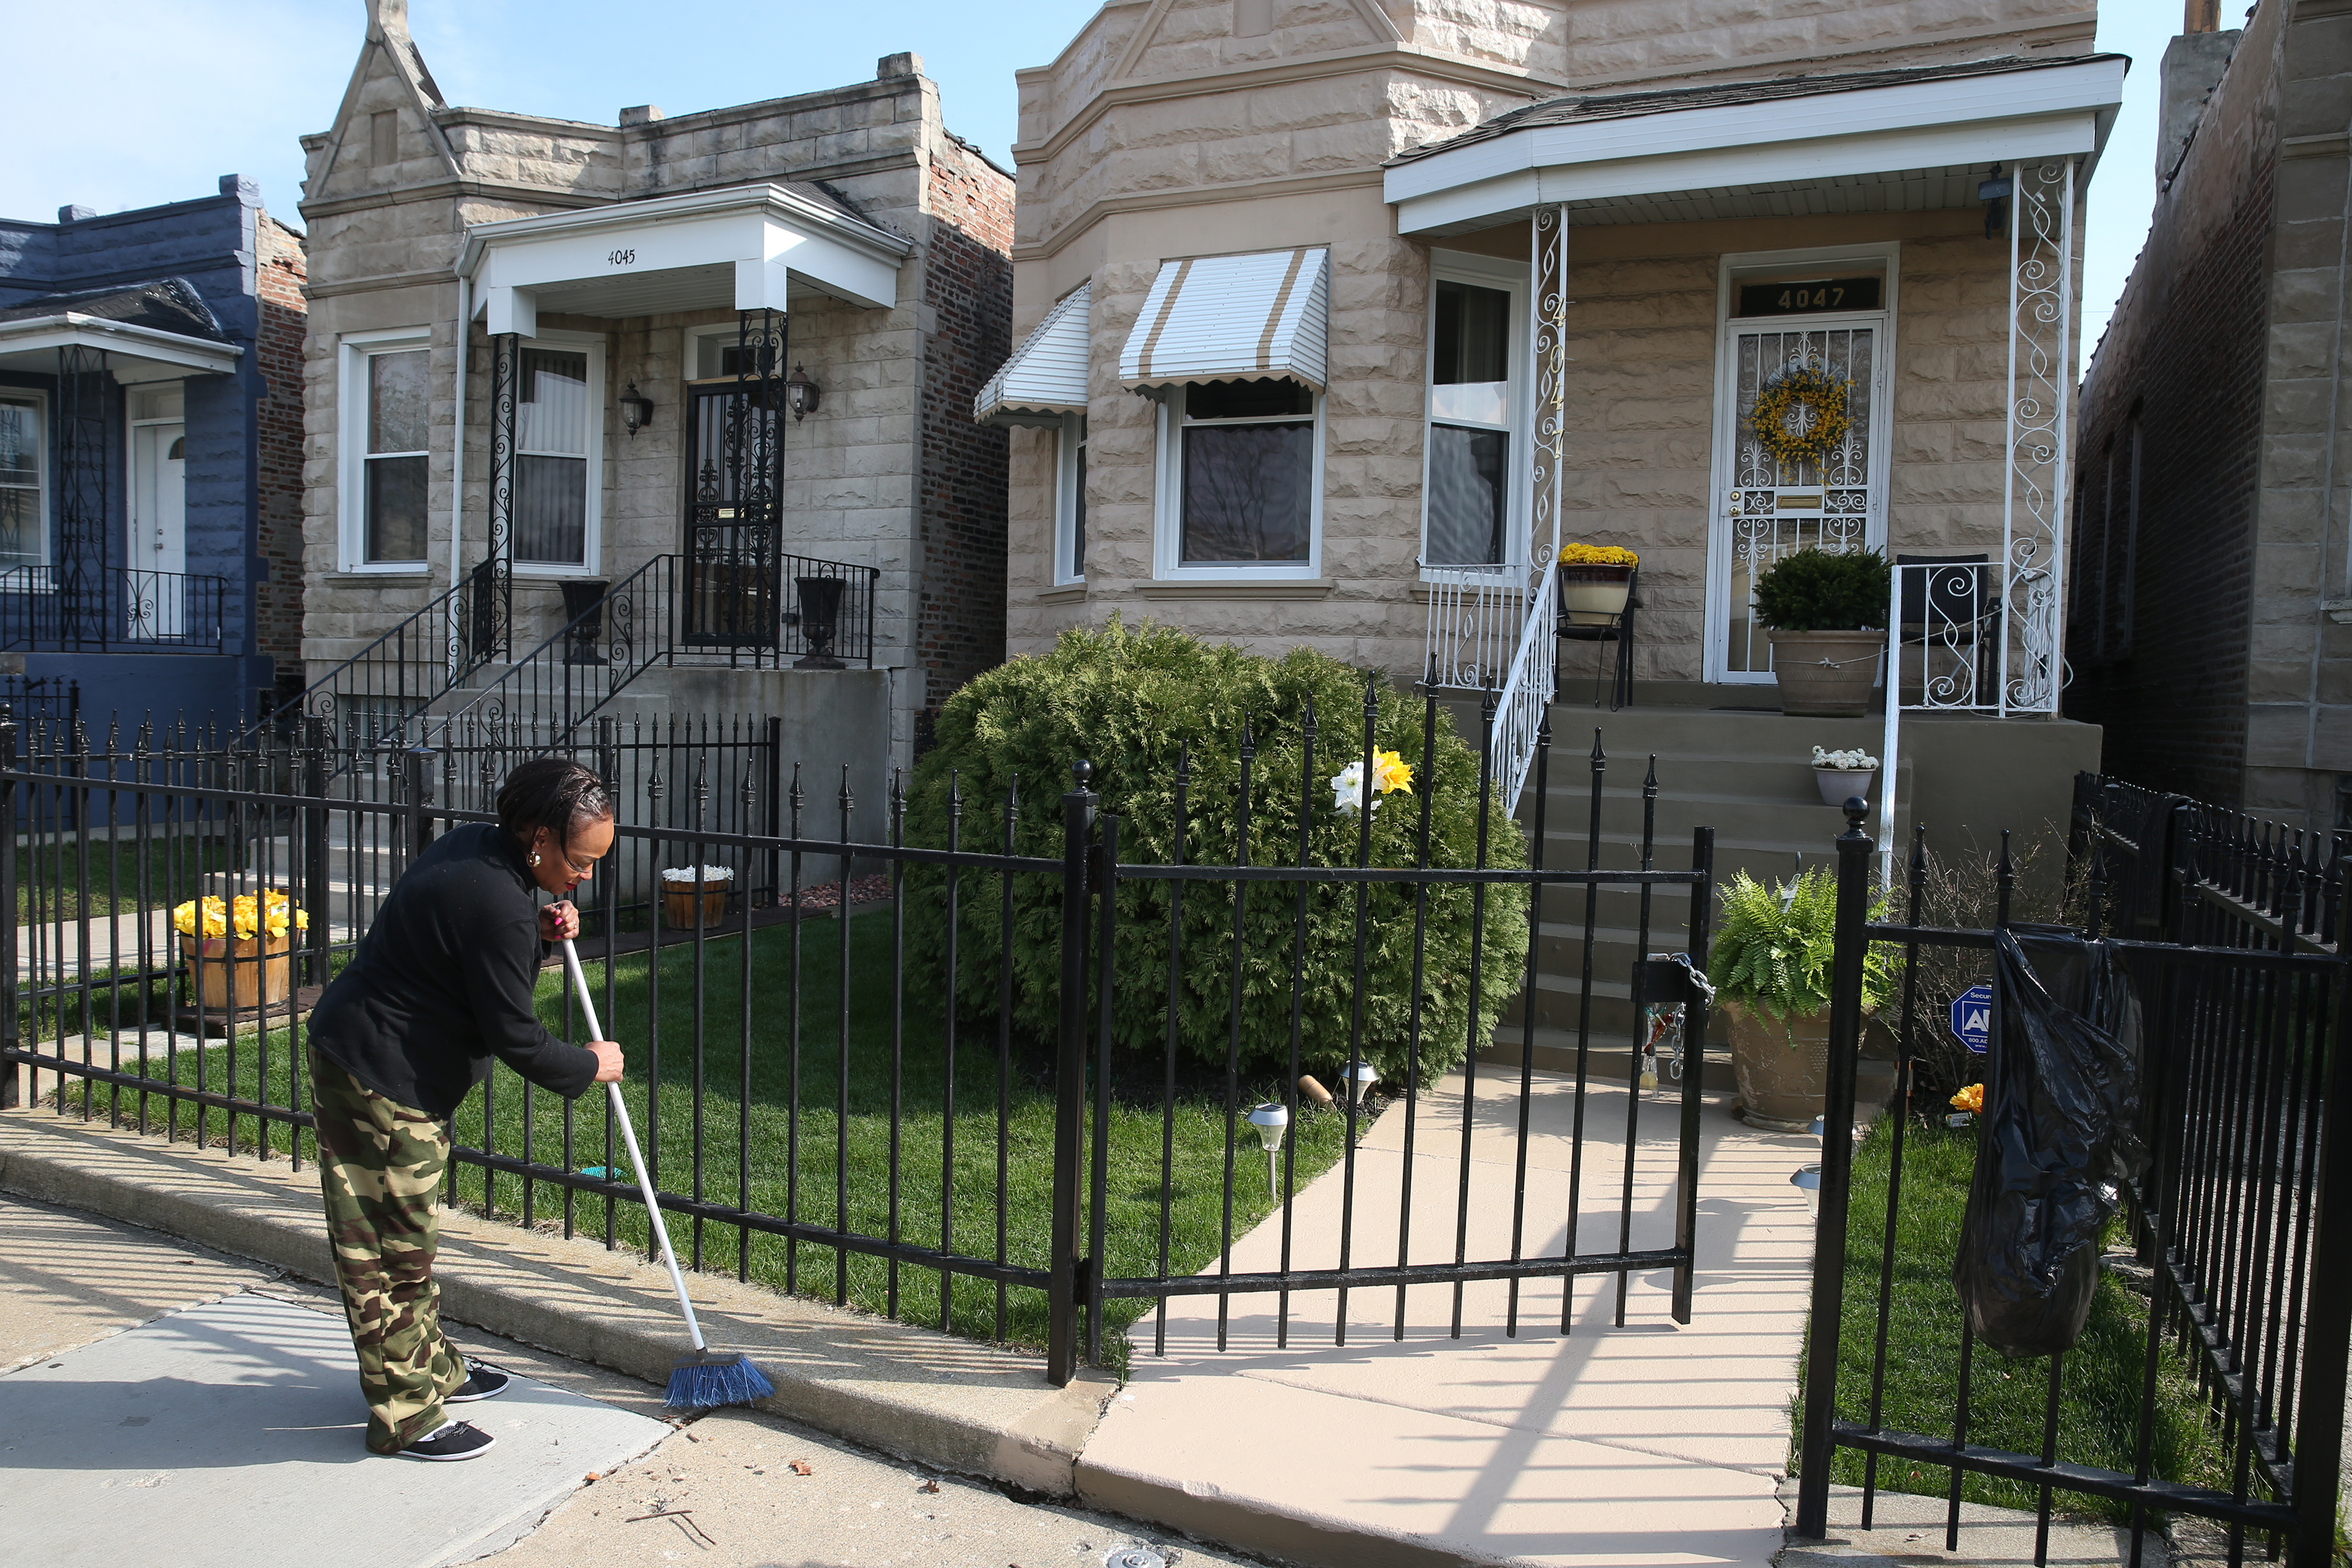 Joan Clark cleans up the sidewalk in front of her Chicago home in April 2017. Several of the homes on her block were assessed at too high a value by the county, a discovery Jason Grotto made while working on his Chicago Tribune/ProPublica Illinois investigative series “The Tax Divide”